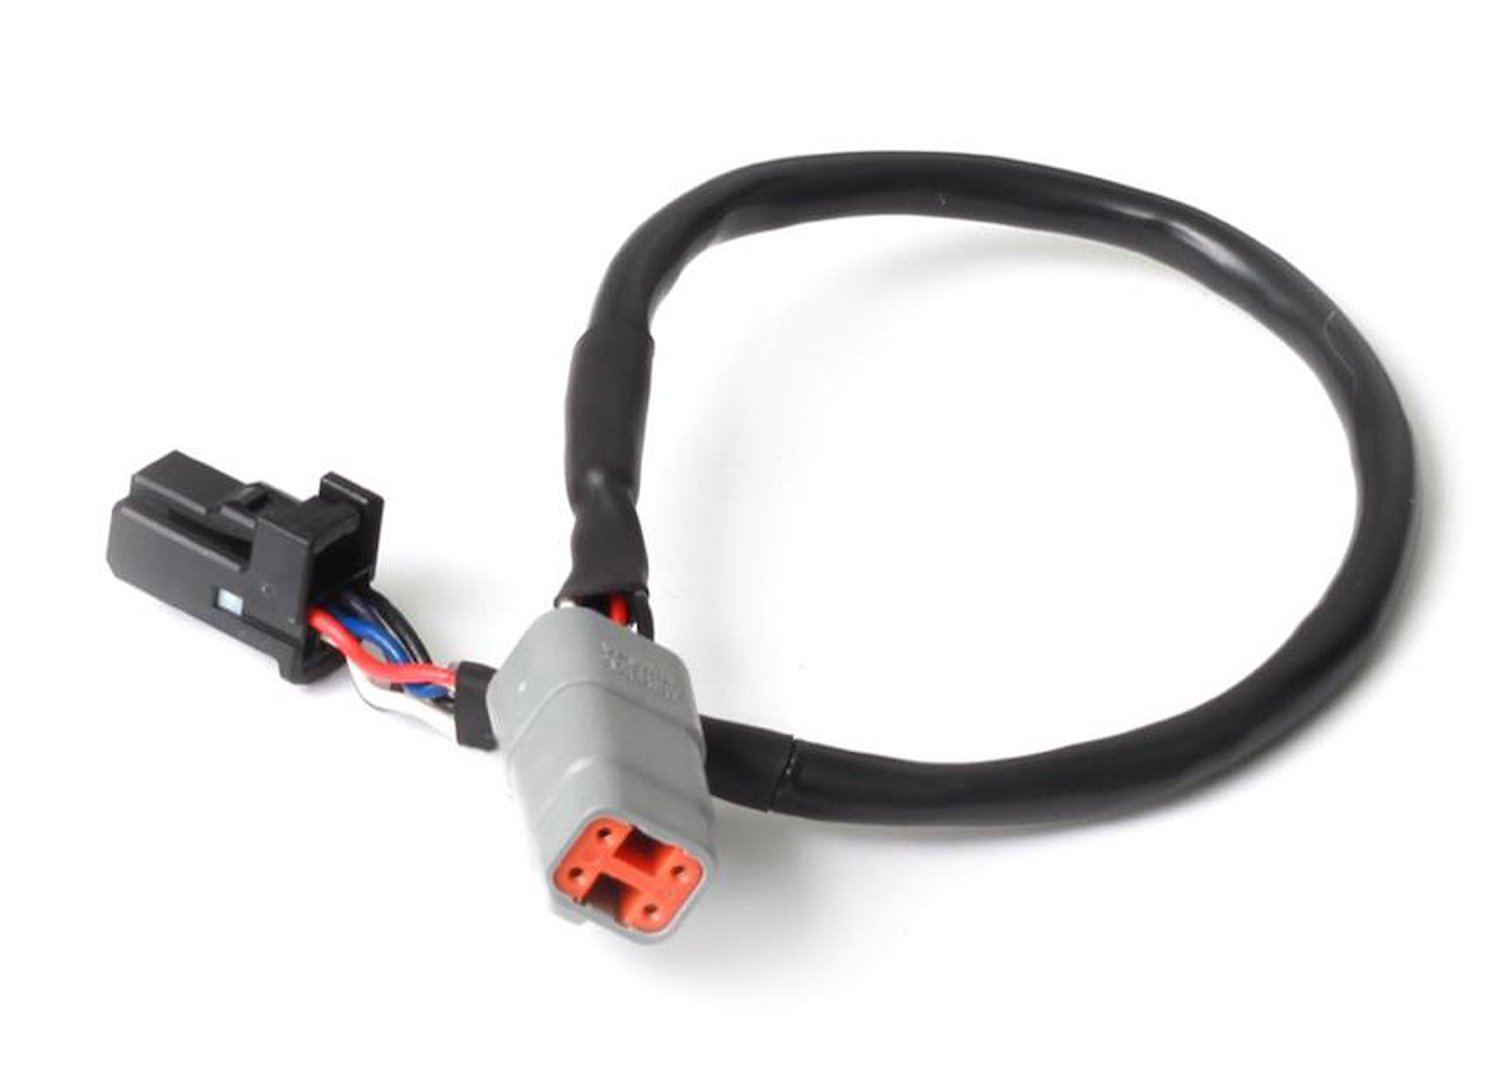 HT-130034 Elite CAN Cable, DTM-4, 8-Pin Black Tyco, 900 mm (36 in.)